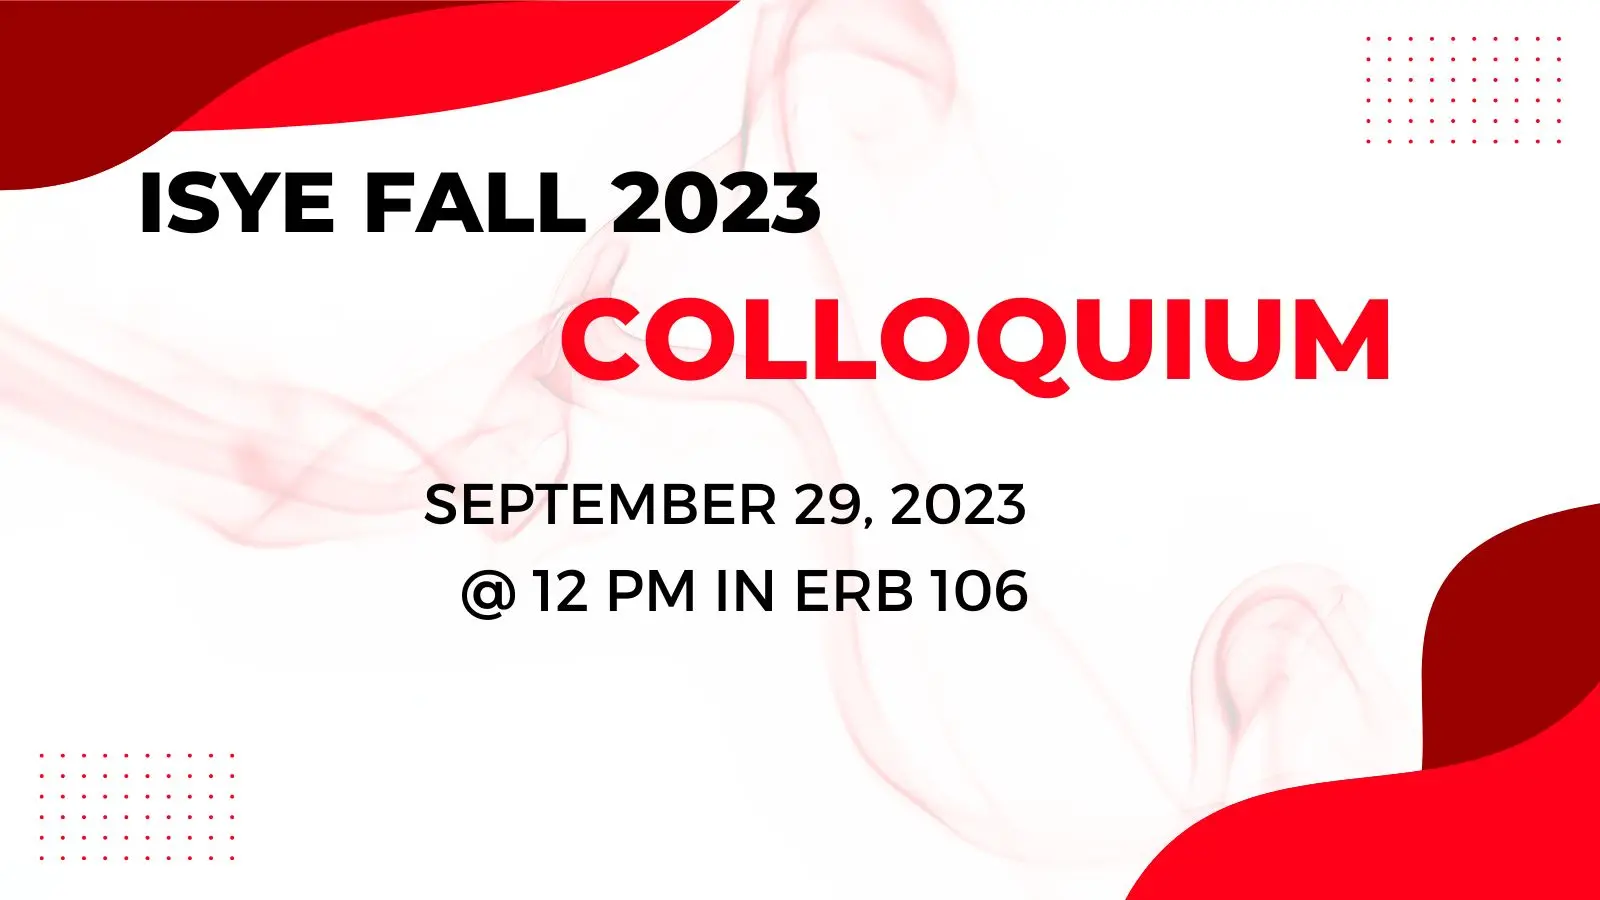 ISyE Fall 2023 Colloquium September 29 at 12 pm in ERB 106